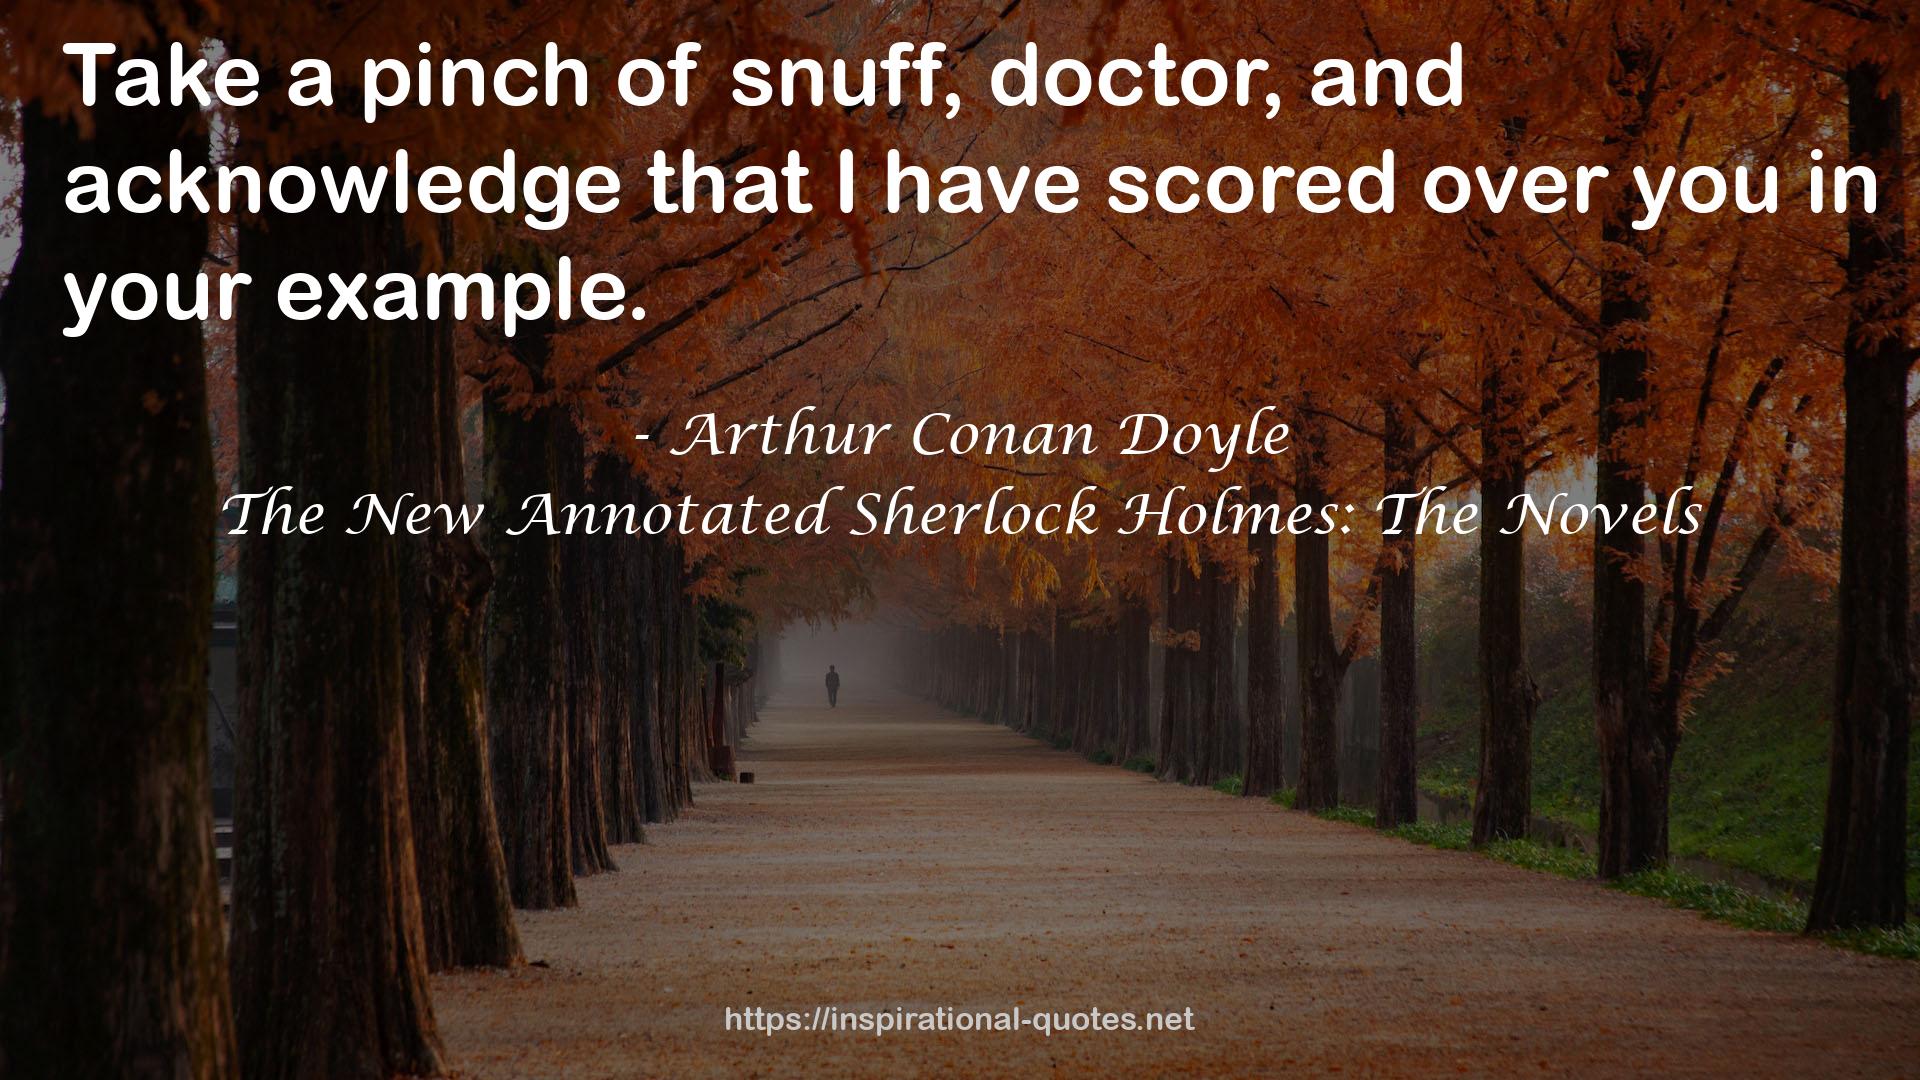 The New Annotated Sherlock Holmes: The Novels QUOTES